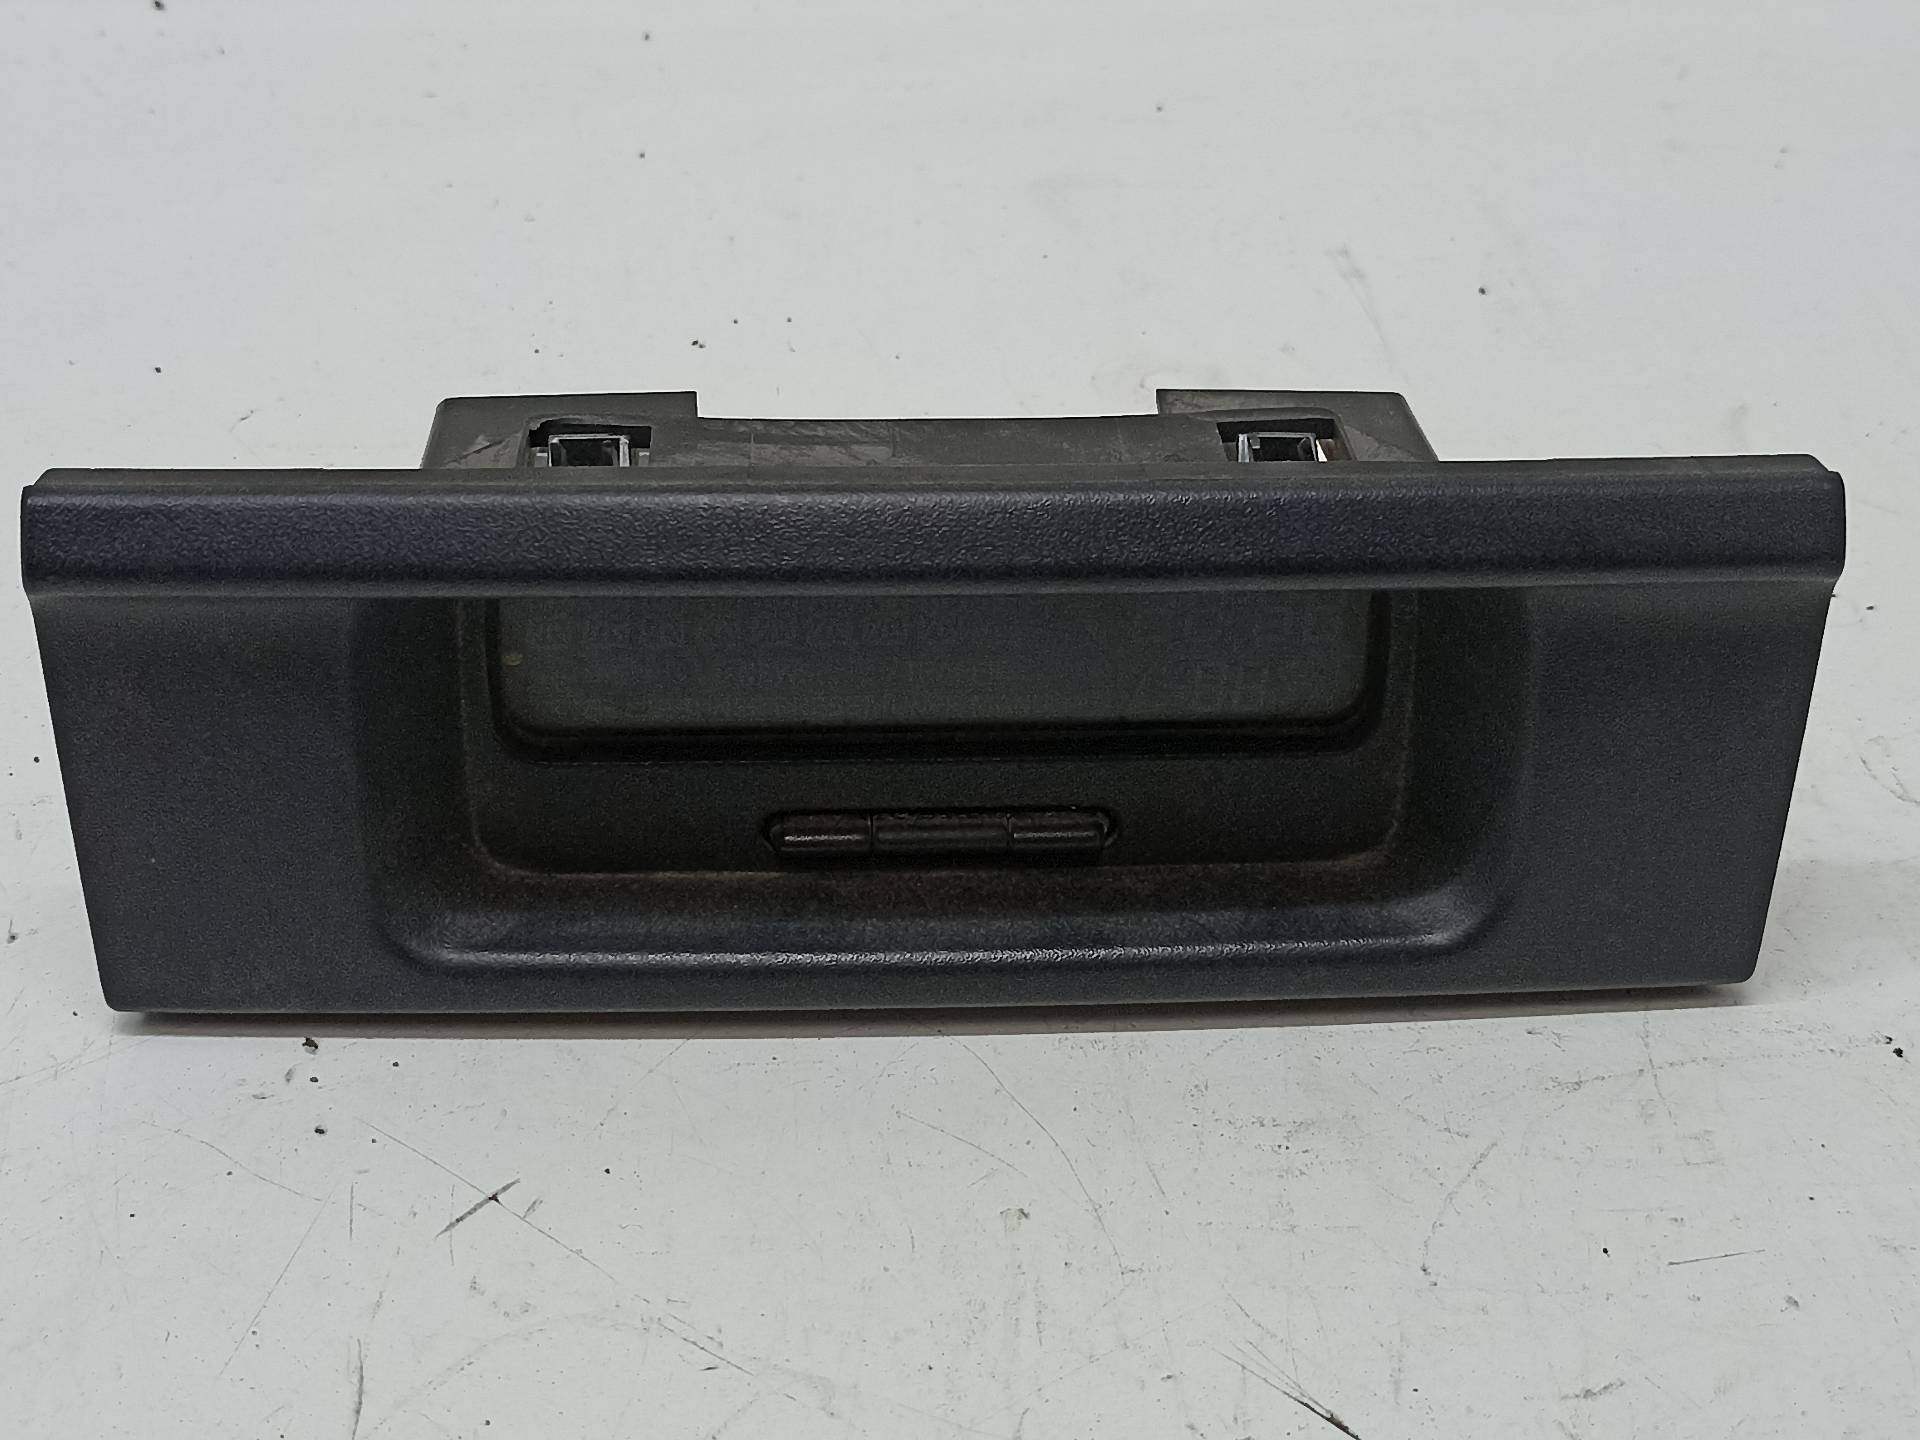 RENAULT 3 generation (2005-2012) Other Interior Parts 8200028364A, 321358517246, 246 24315153